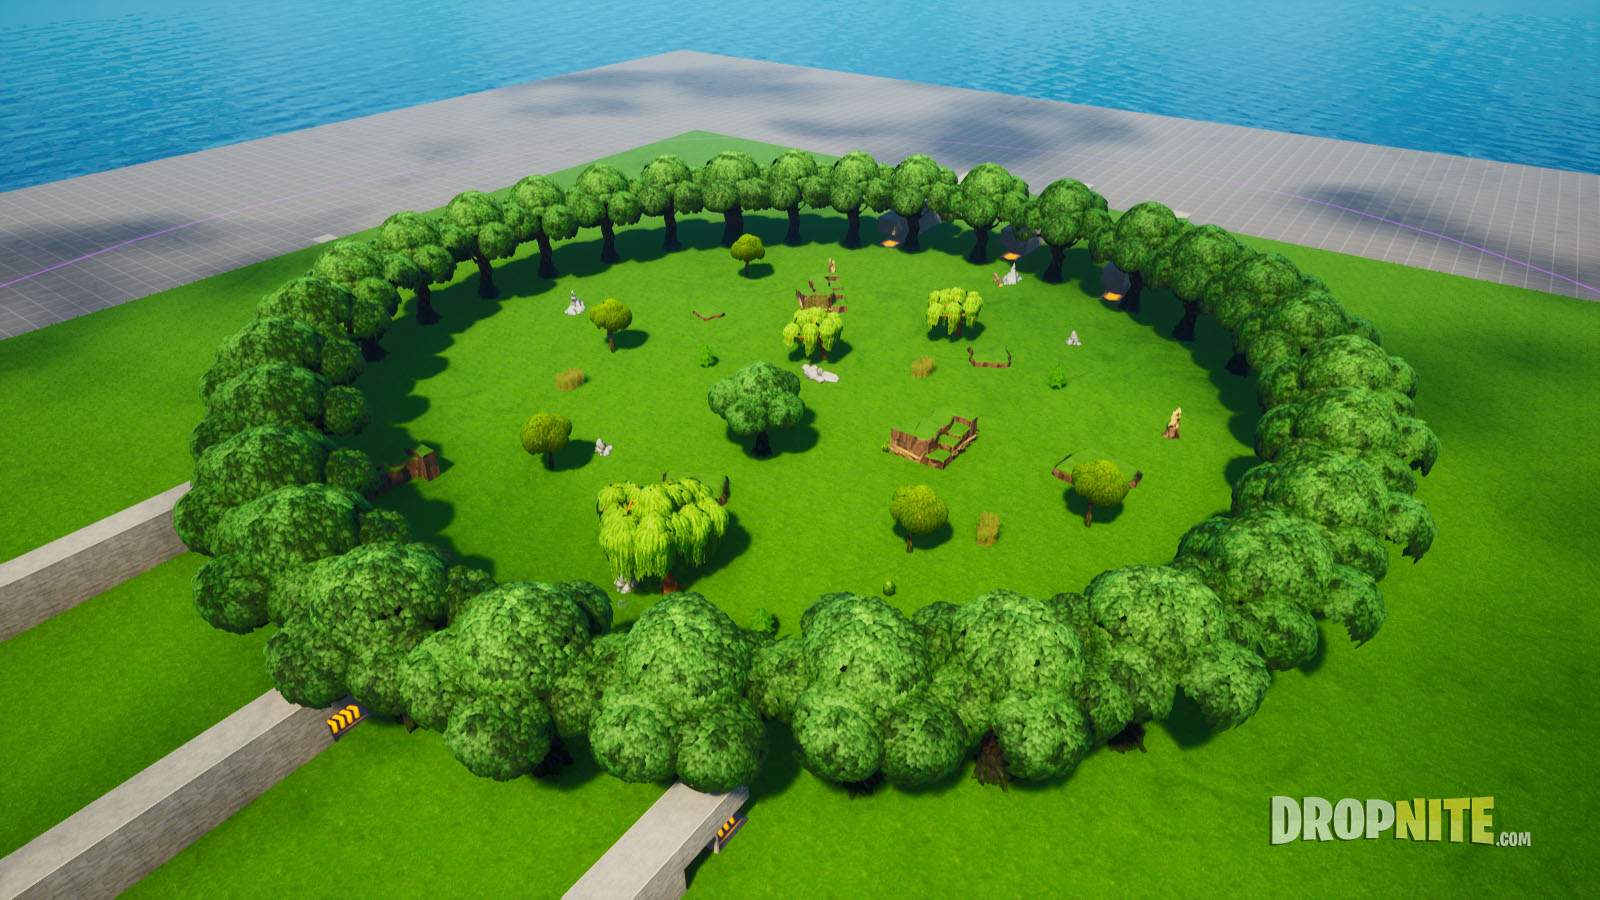 THE MOST REALISTIC 1V1 MAP!